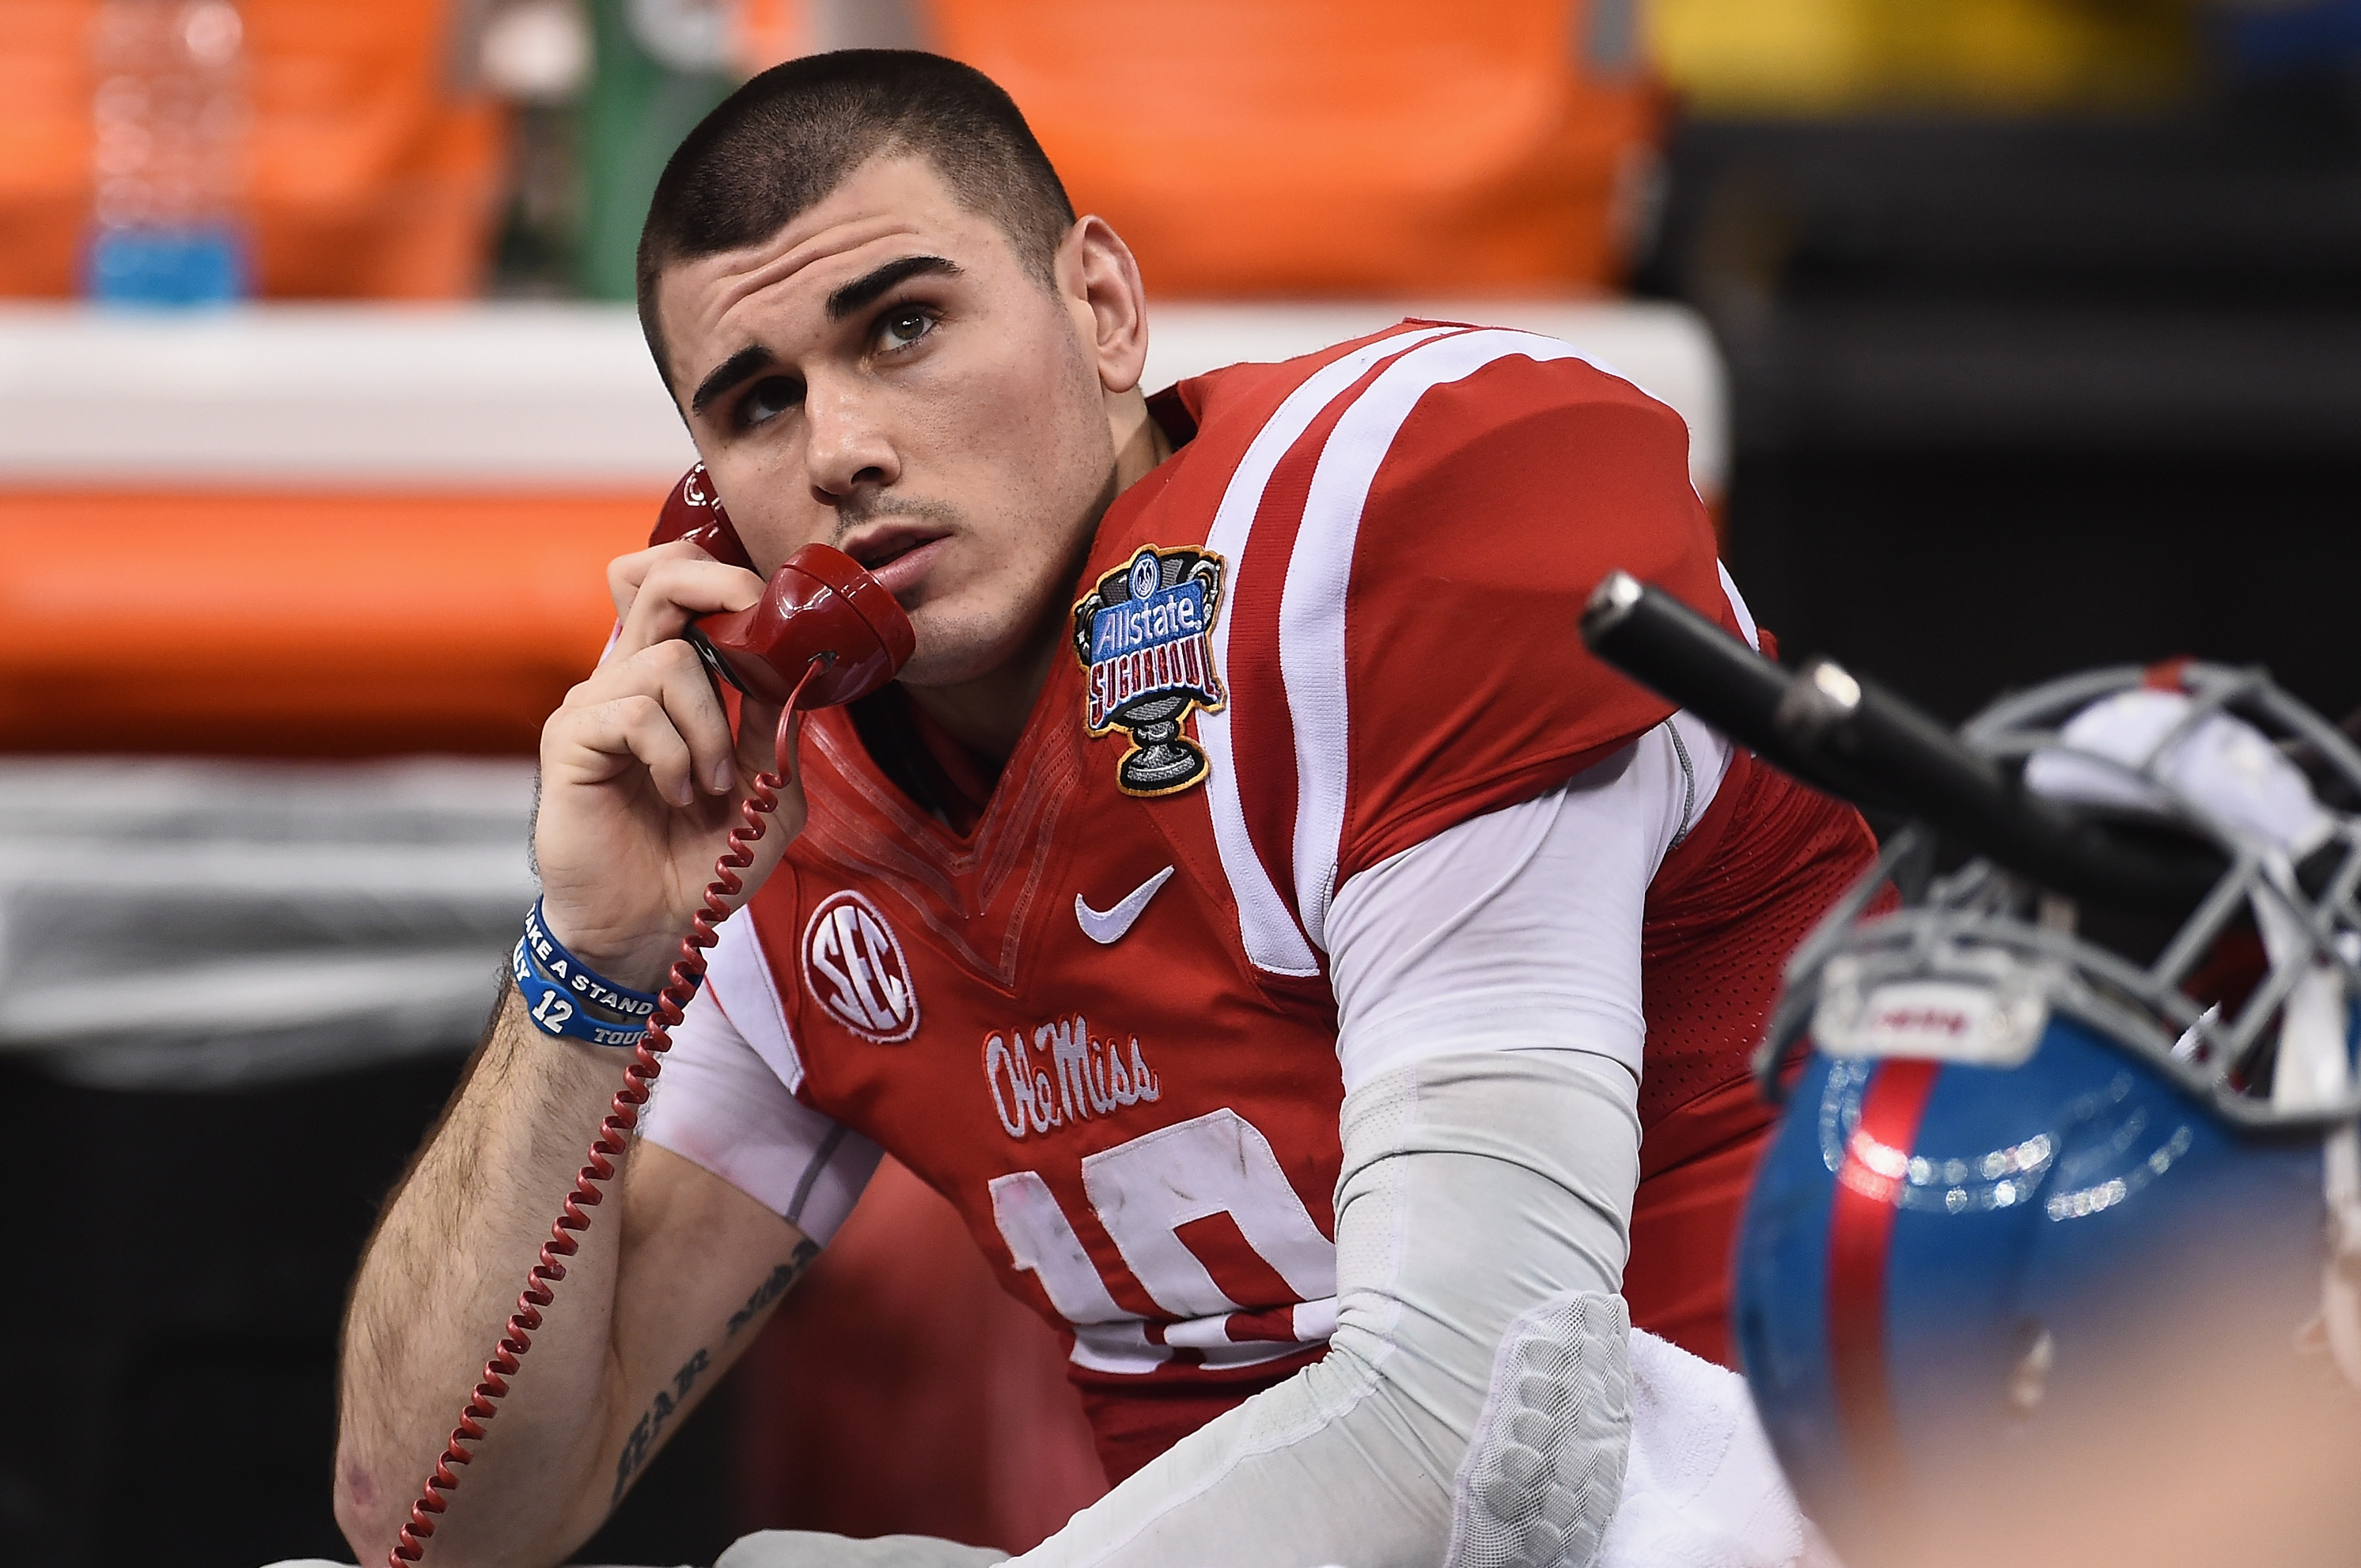 chad kelly news today